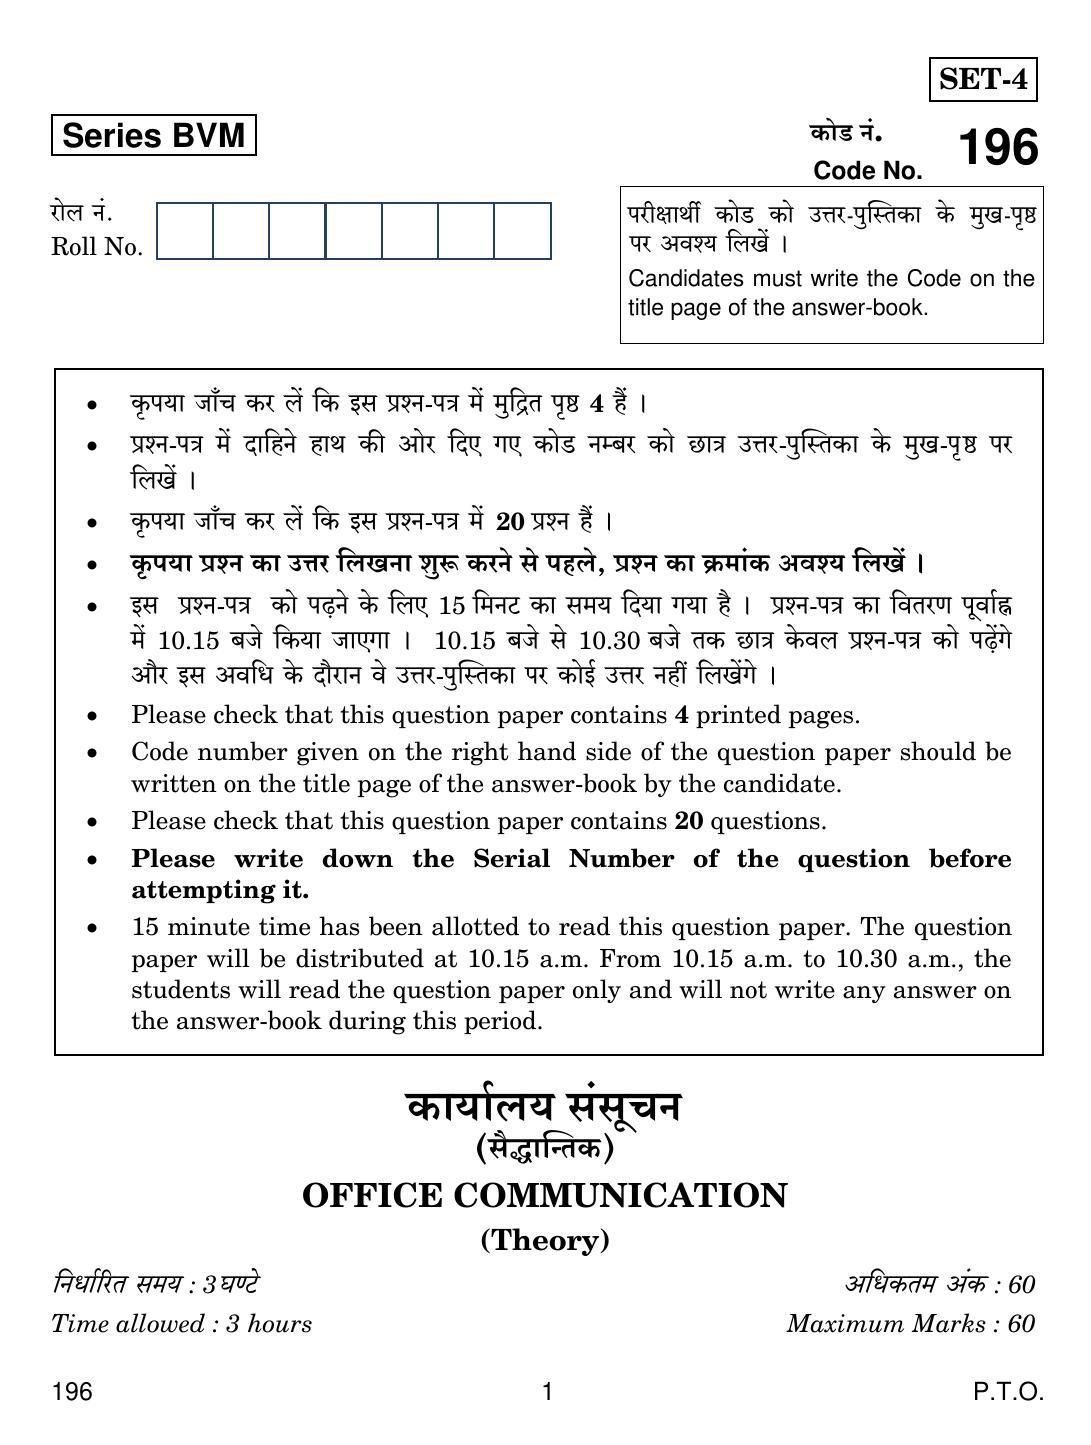 CBSE Class 12 196 Office Communication 2019 Question Paper - Page 1